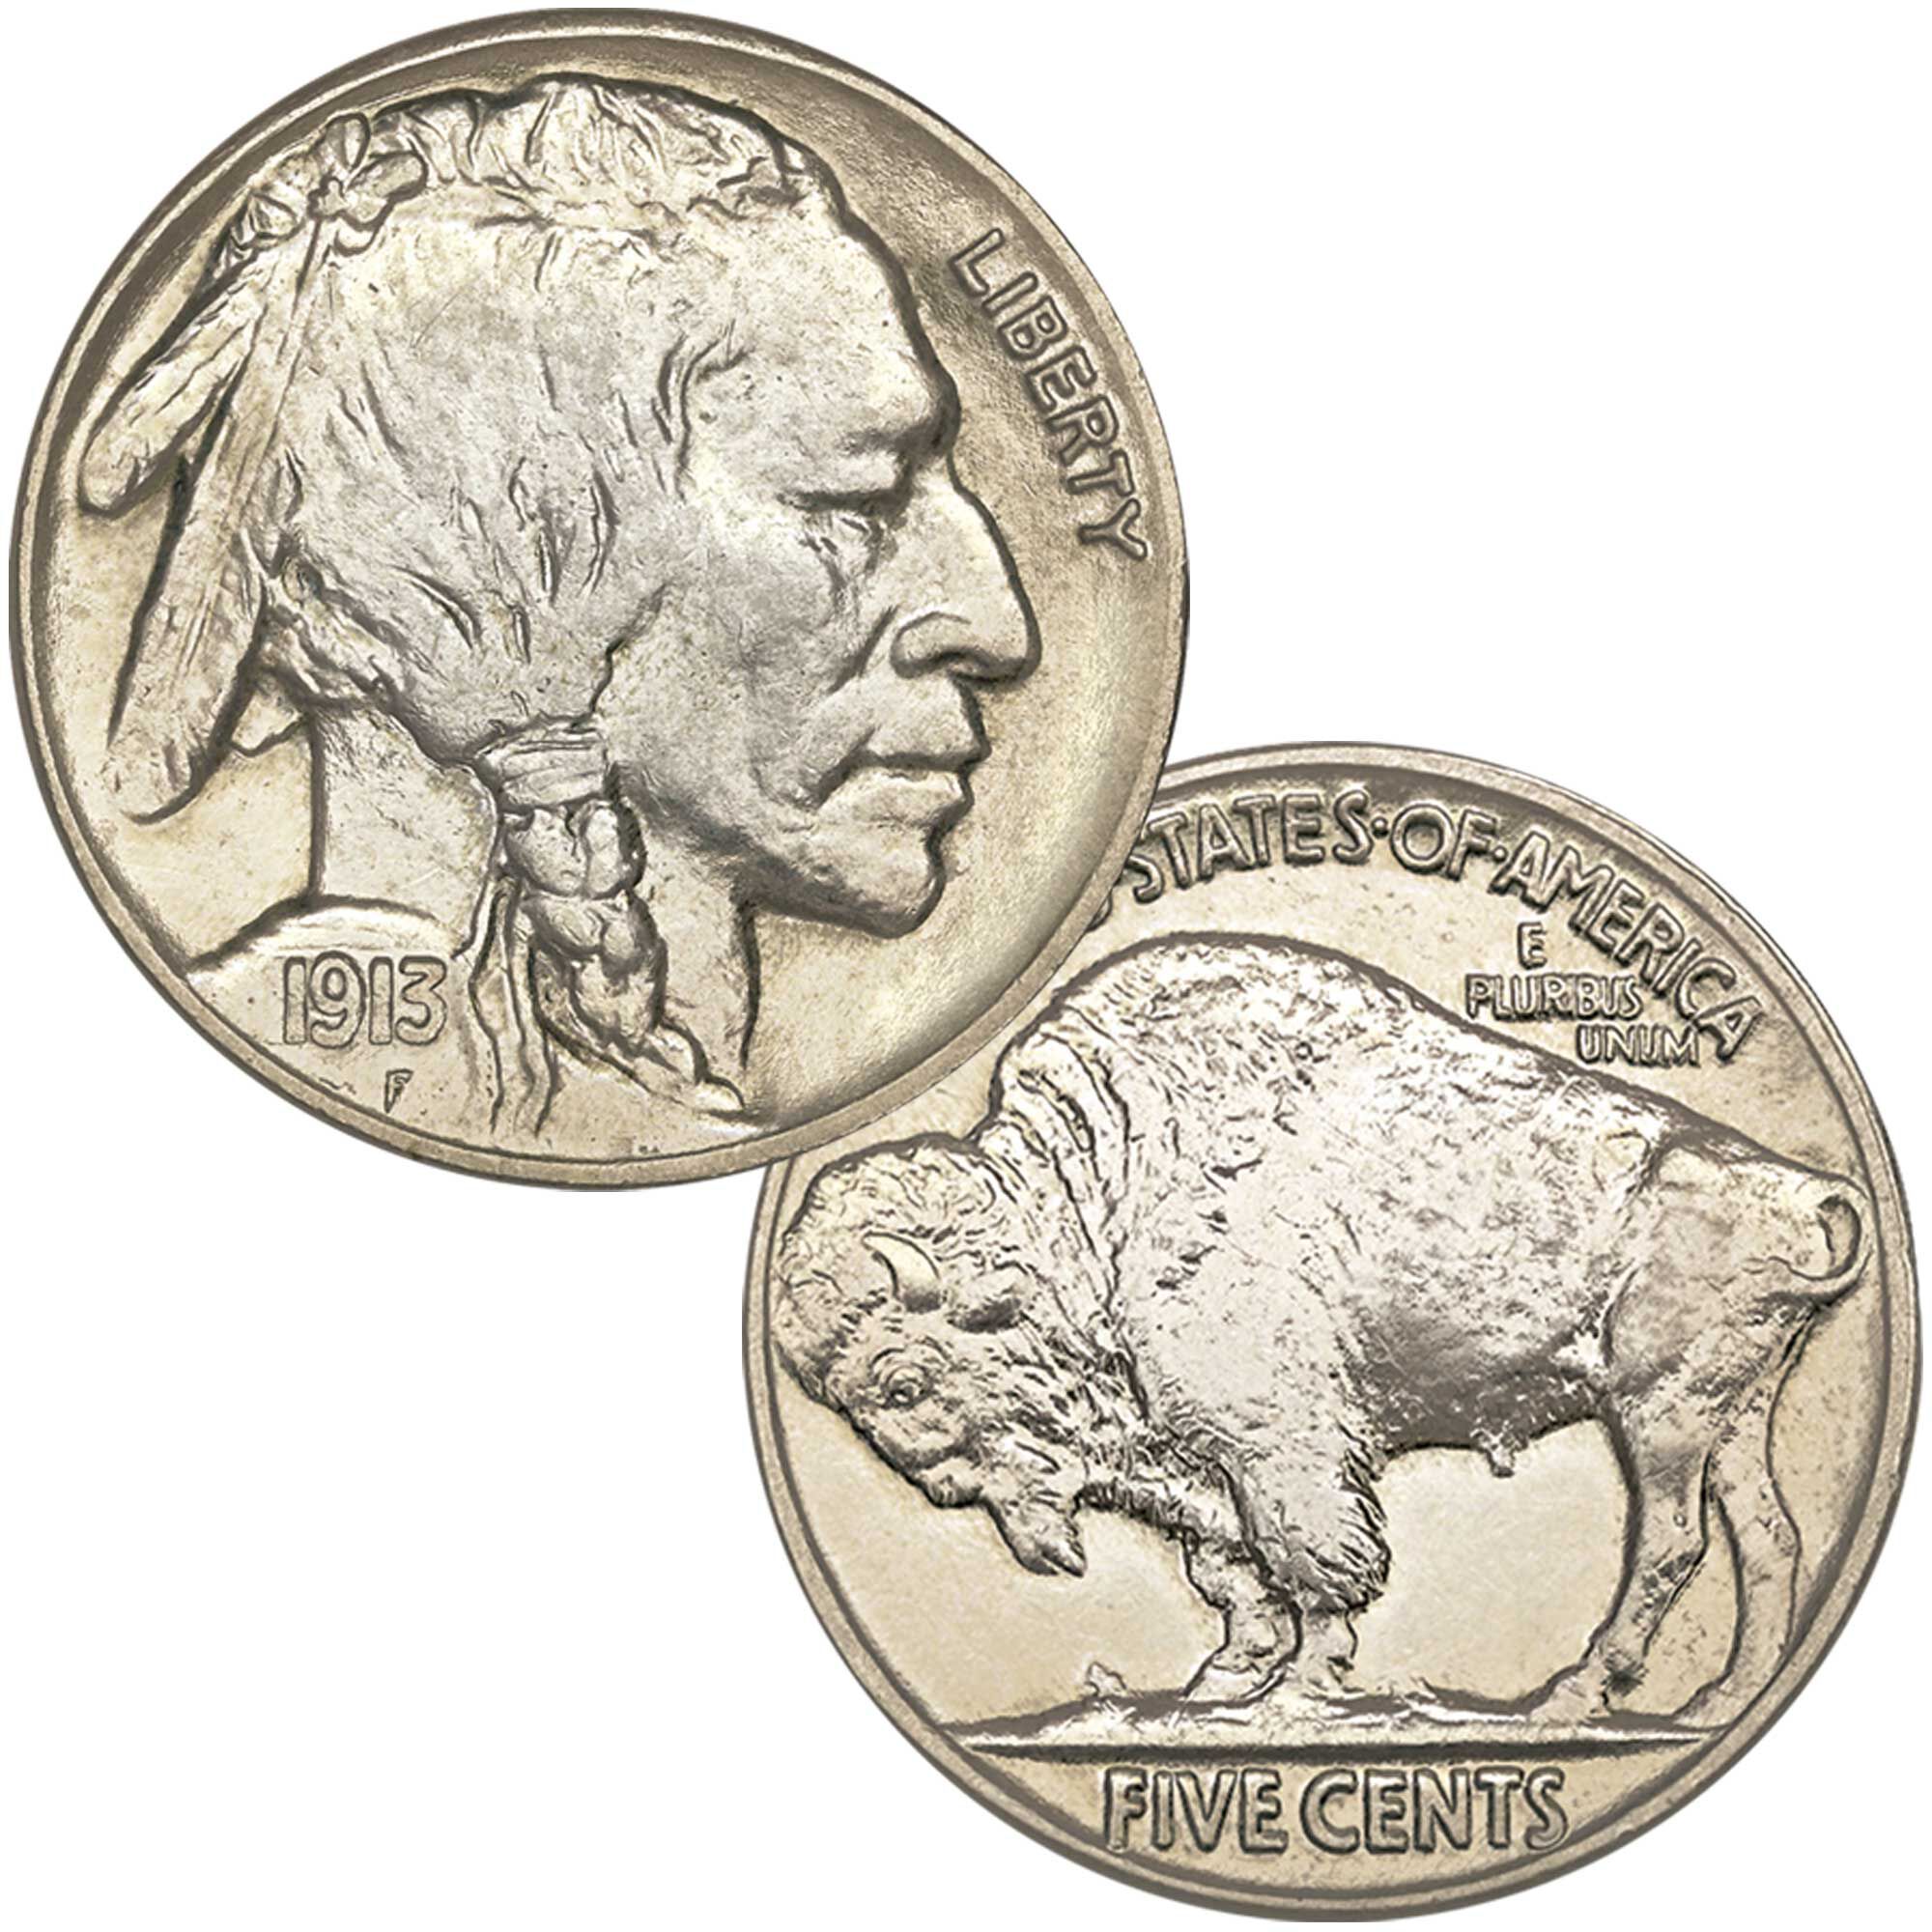 The First-Year Type Set of Uncirculated Buffalo Nickels